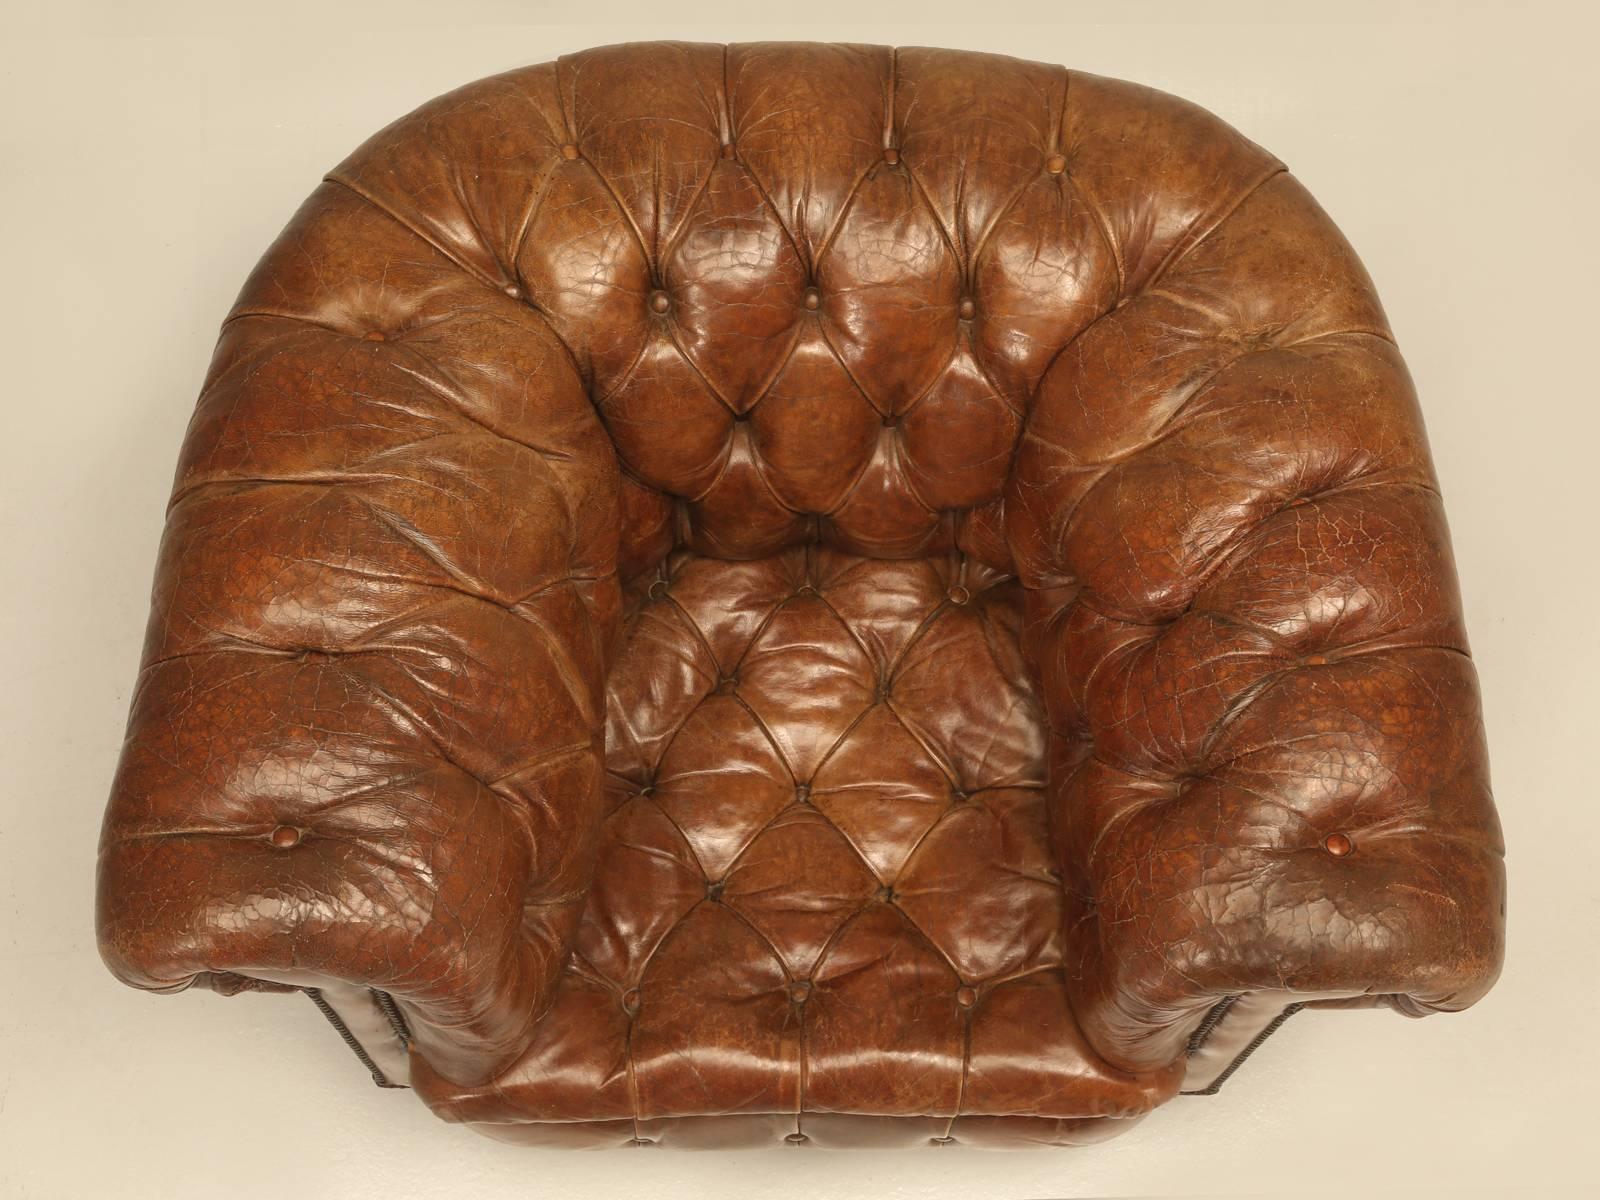 One of the best real antique (over 100 years old) unrestored leather English Chesterfield chair I have every owned. The best thing about this all original English Chesterfield, is that no one tried to restore the chair, or re-dye the leather. The